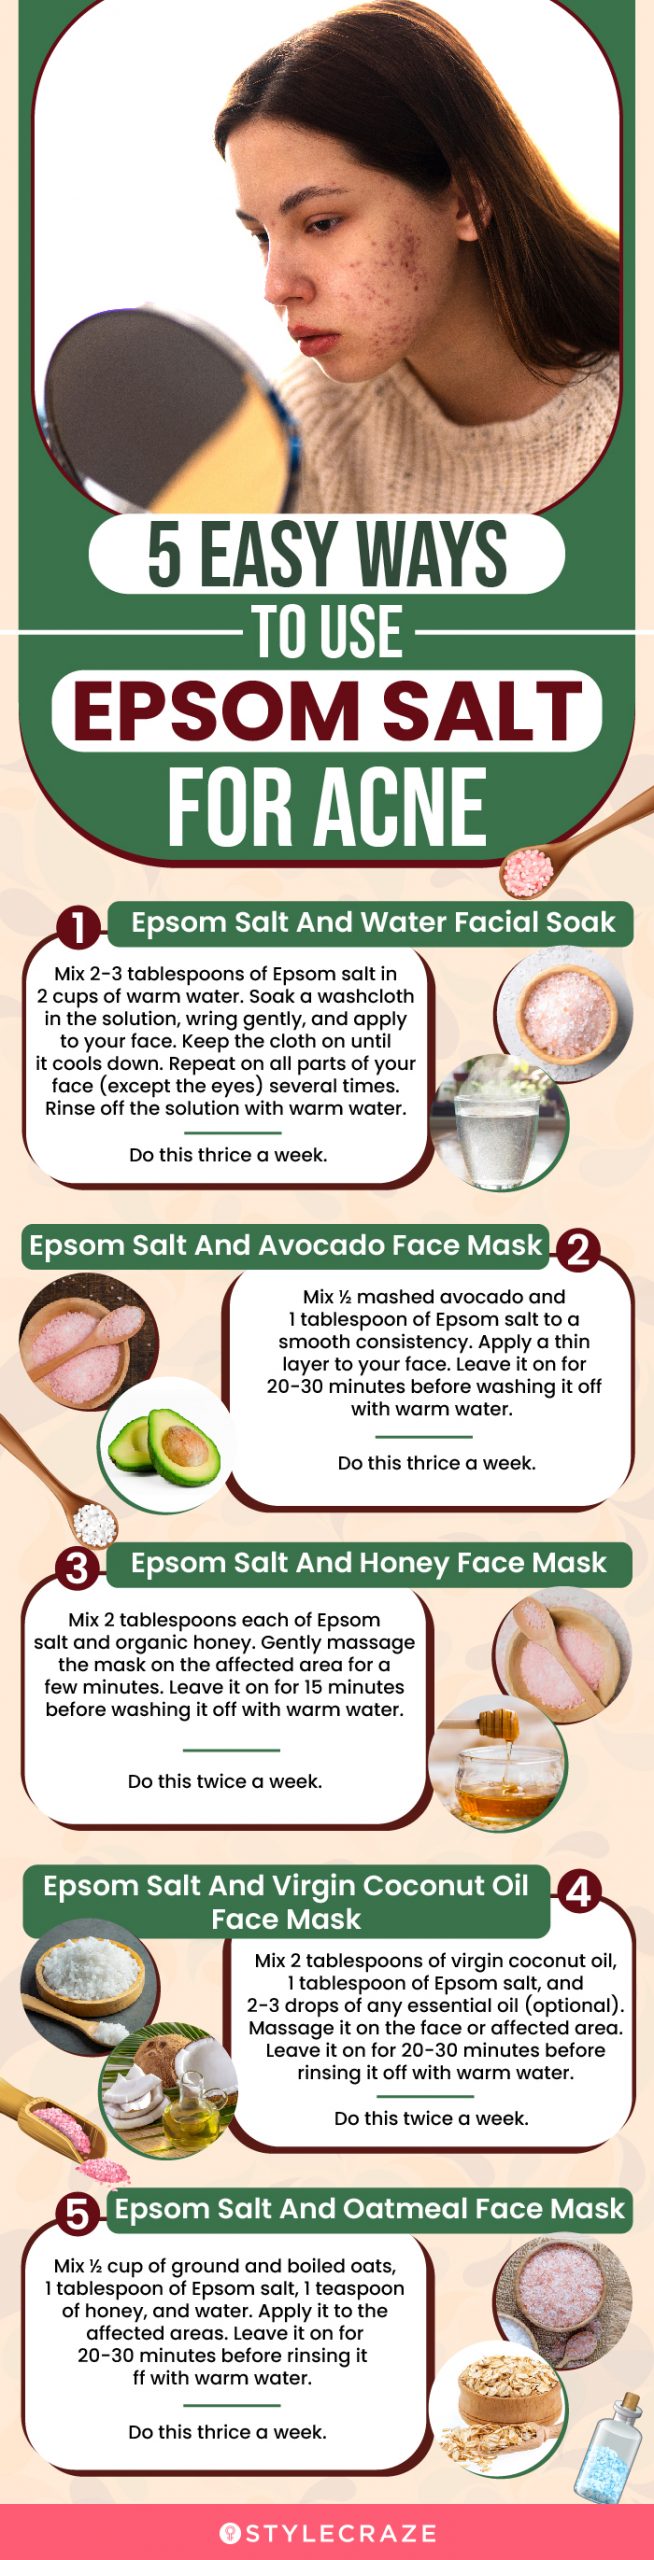 5 easy ways to use epsom salt for acne (infographic)